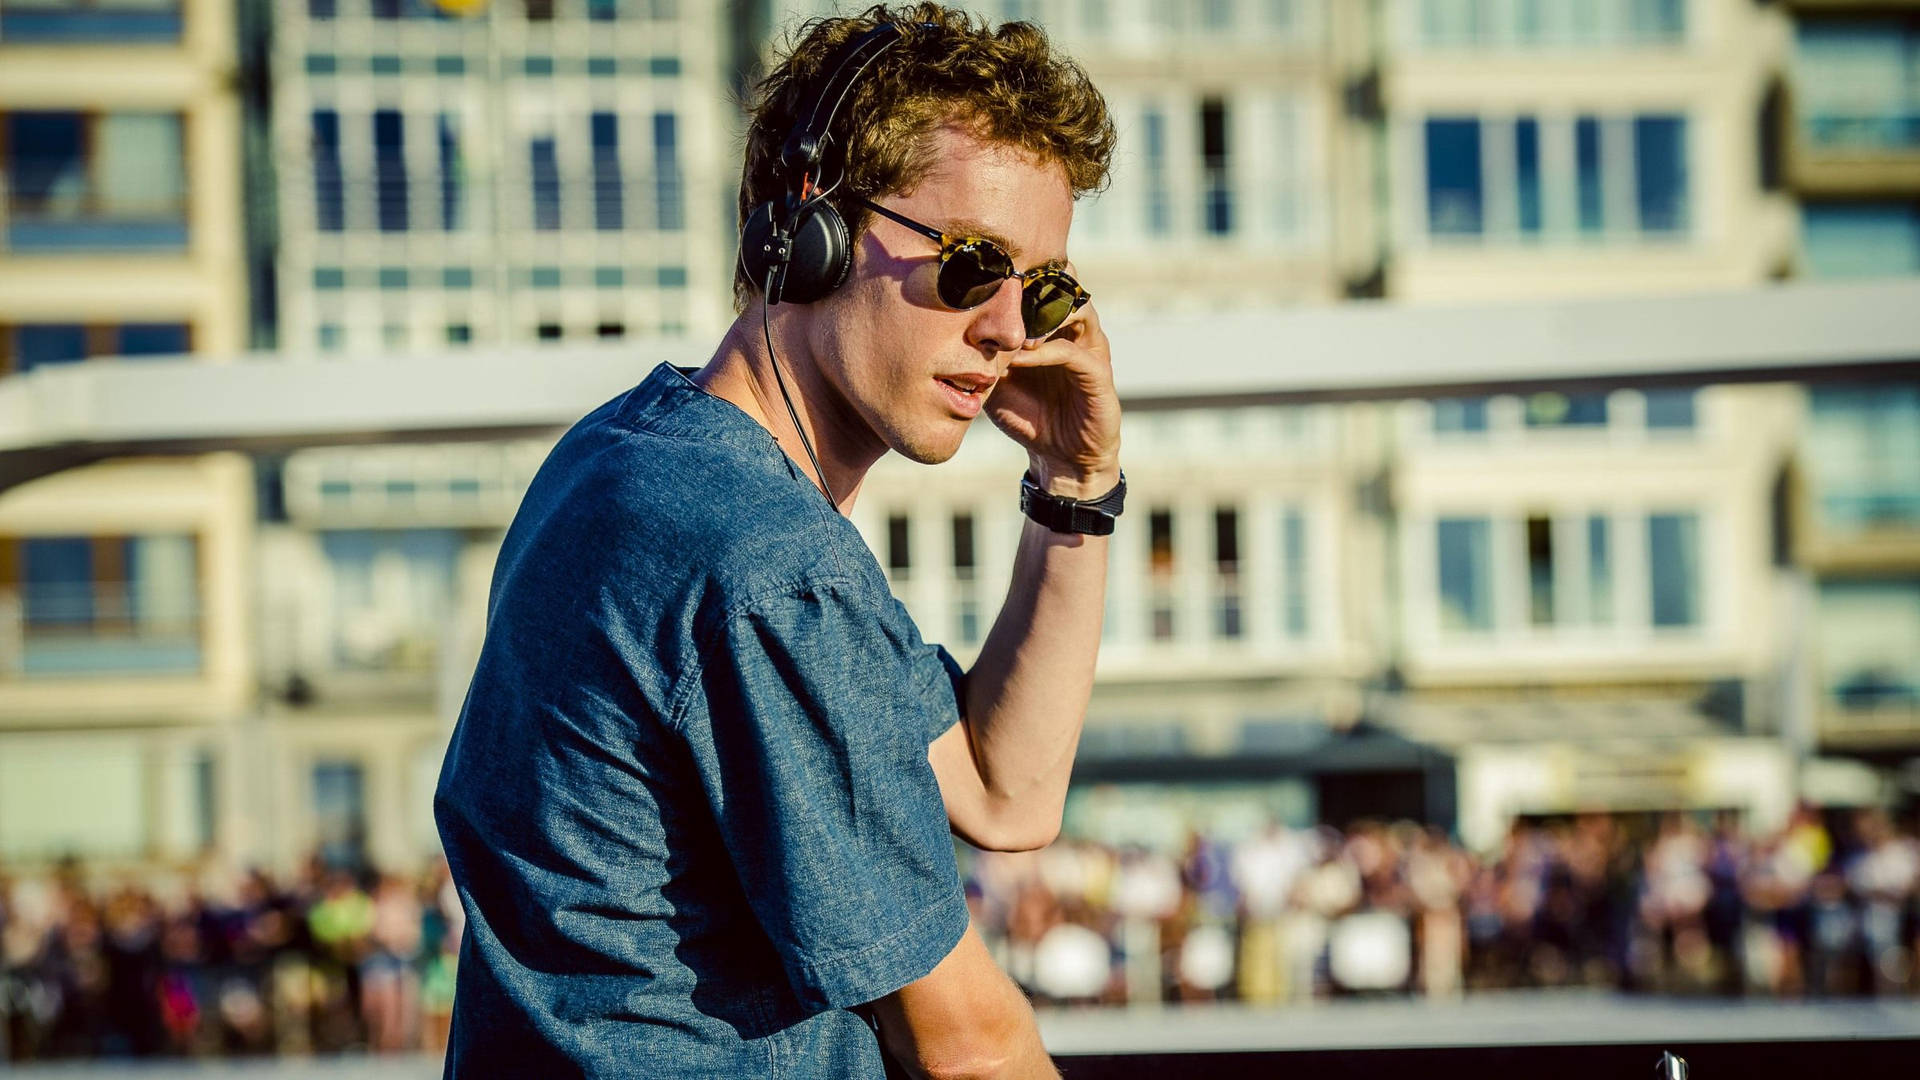 Lost Frequencies Under The Sun Wallpaper